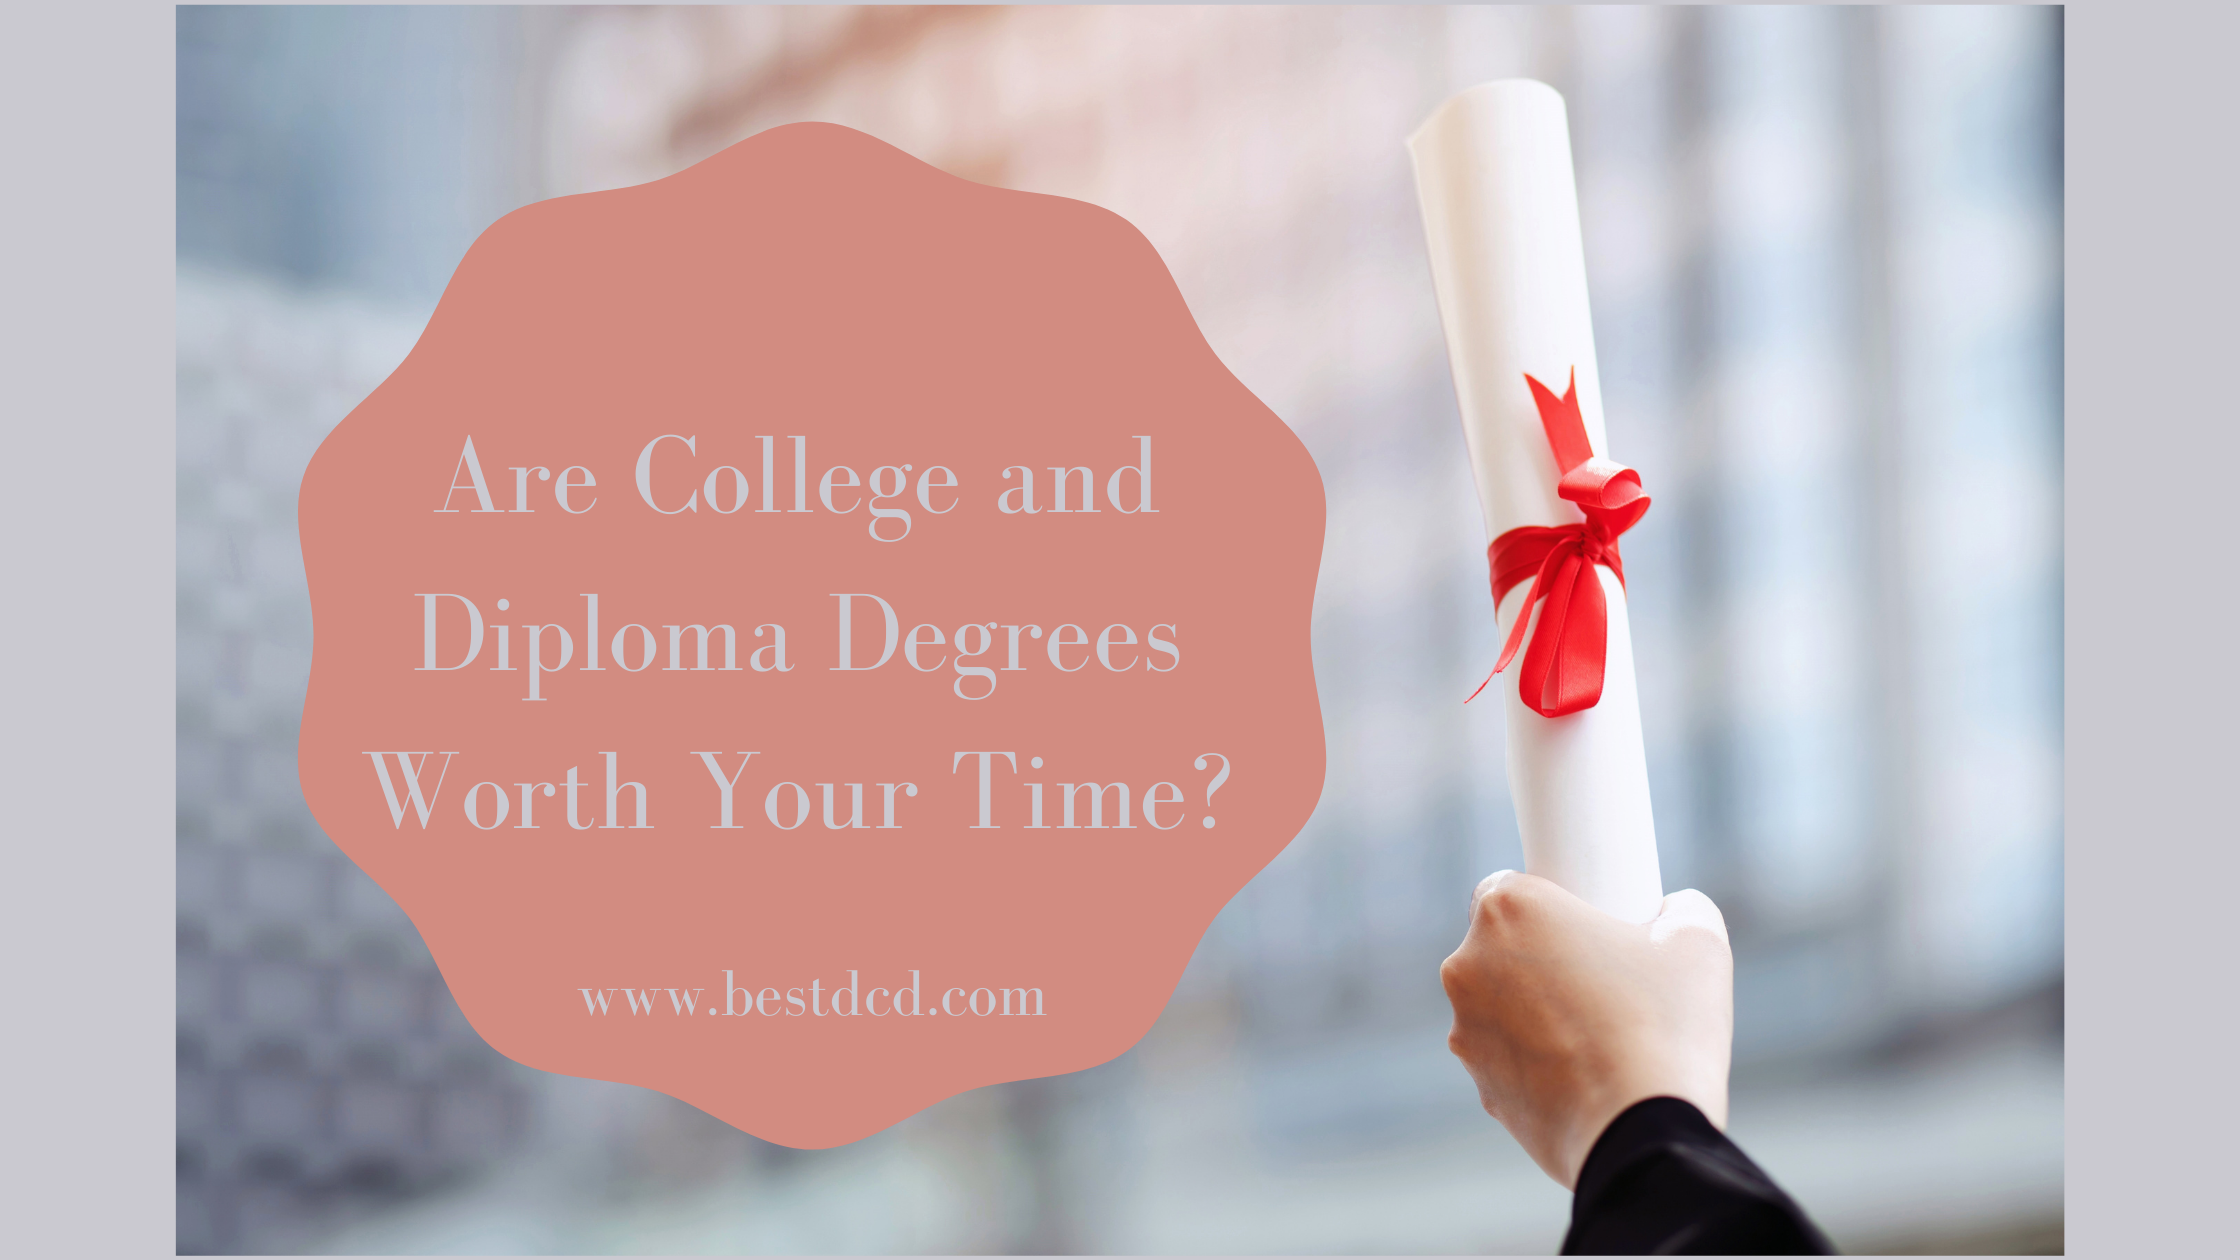 Are College and Diploma Degrees Worth Your Time?